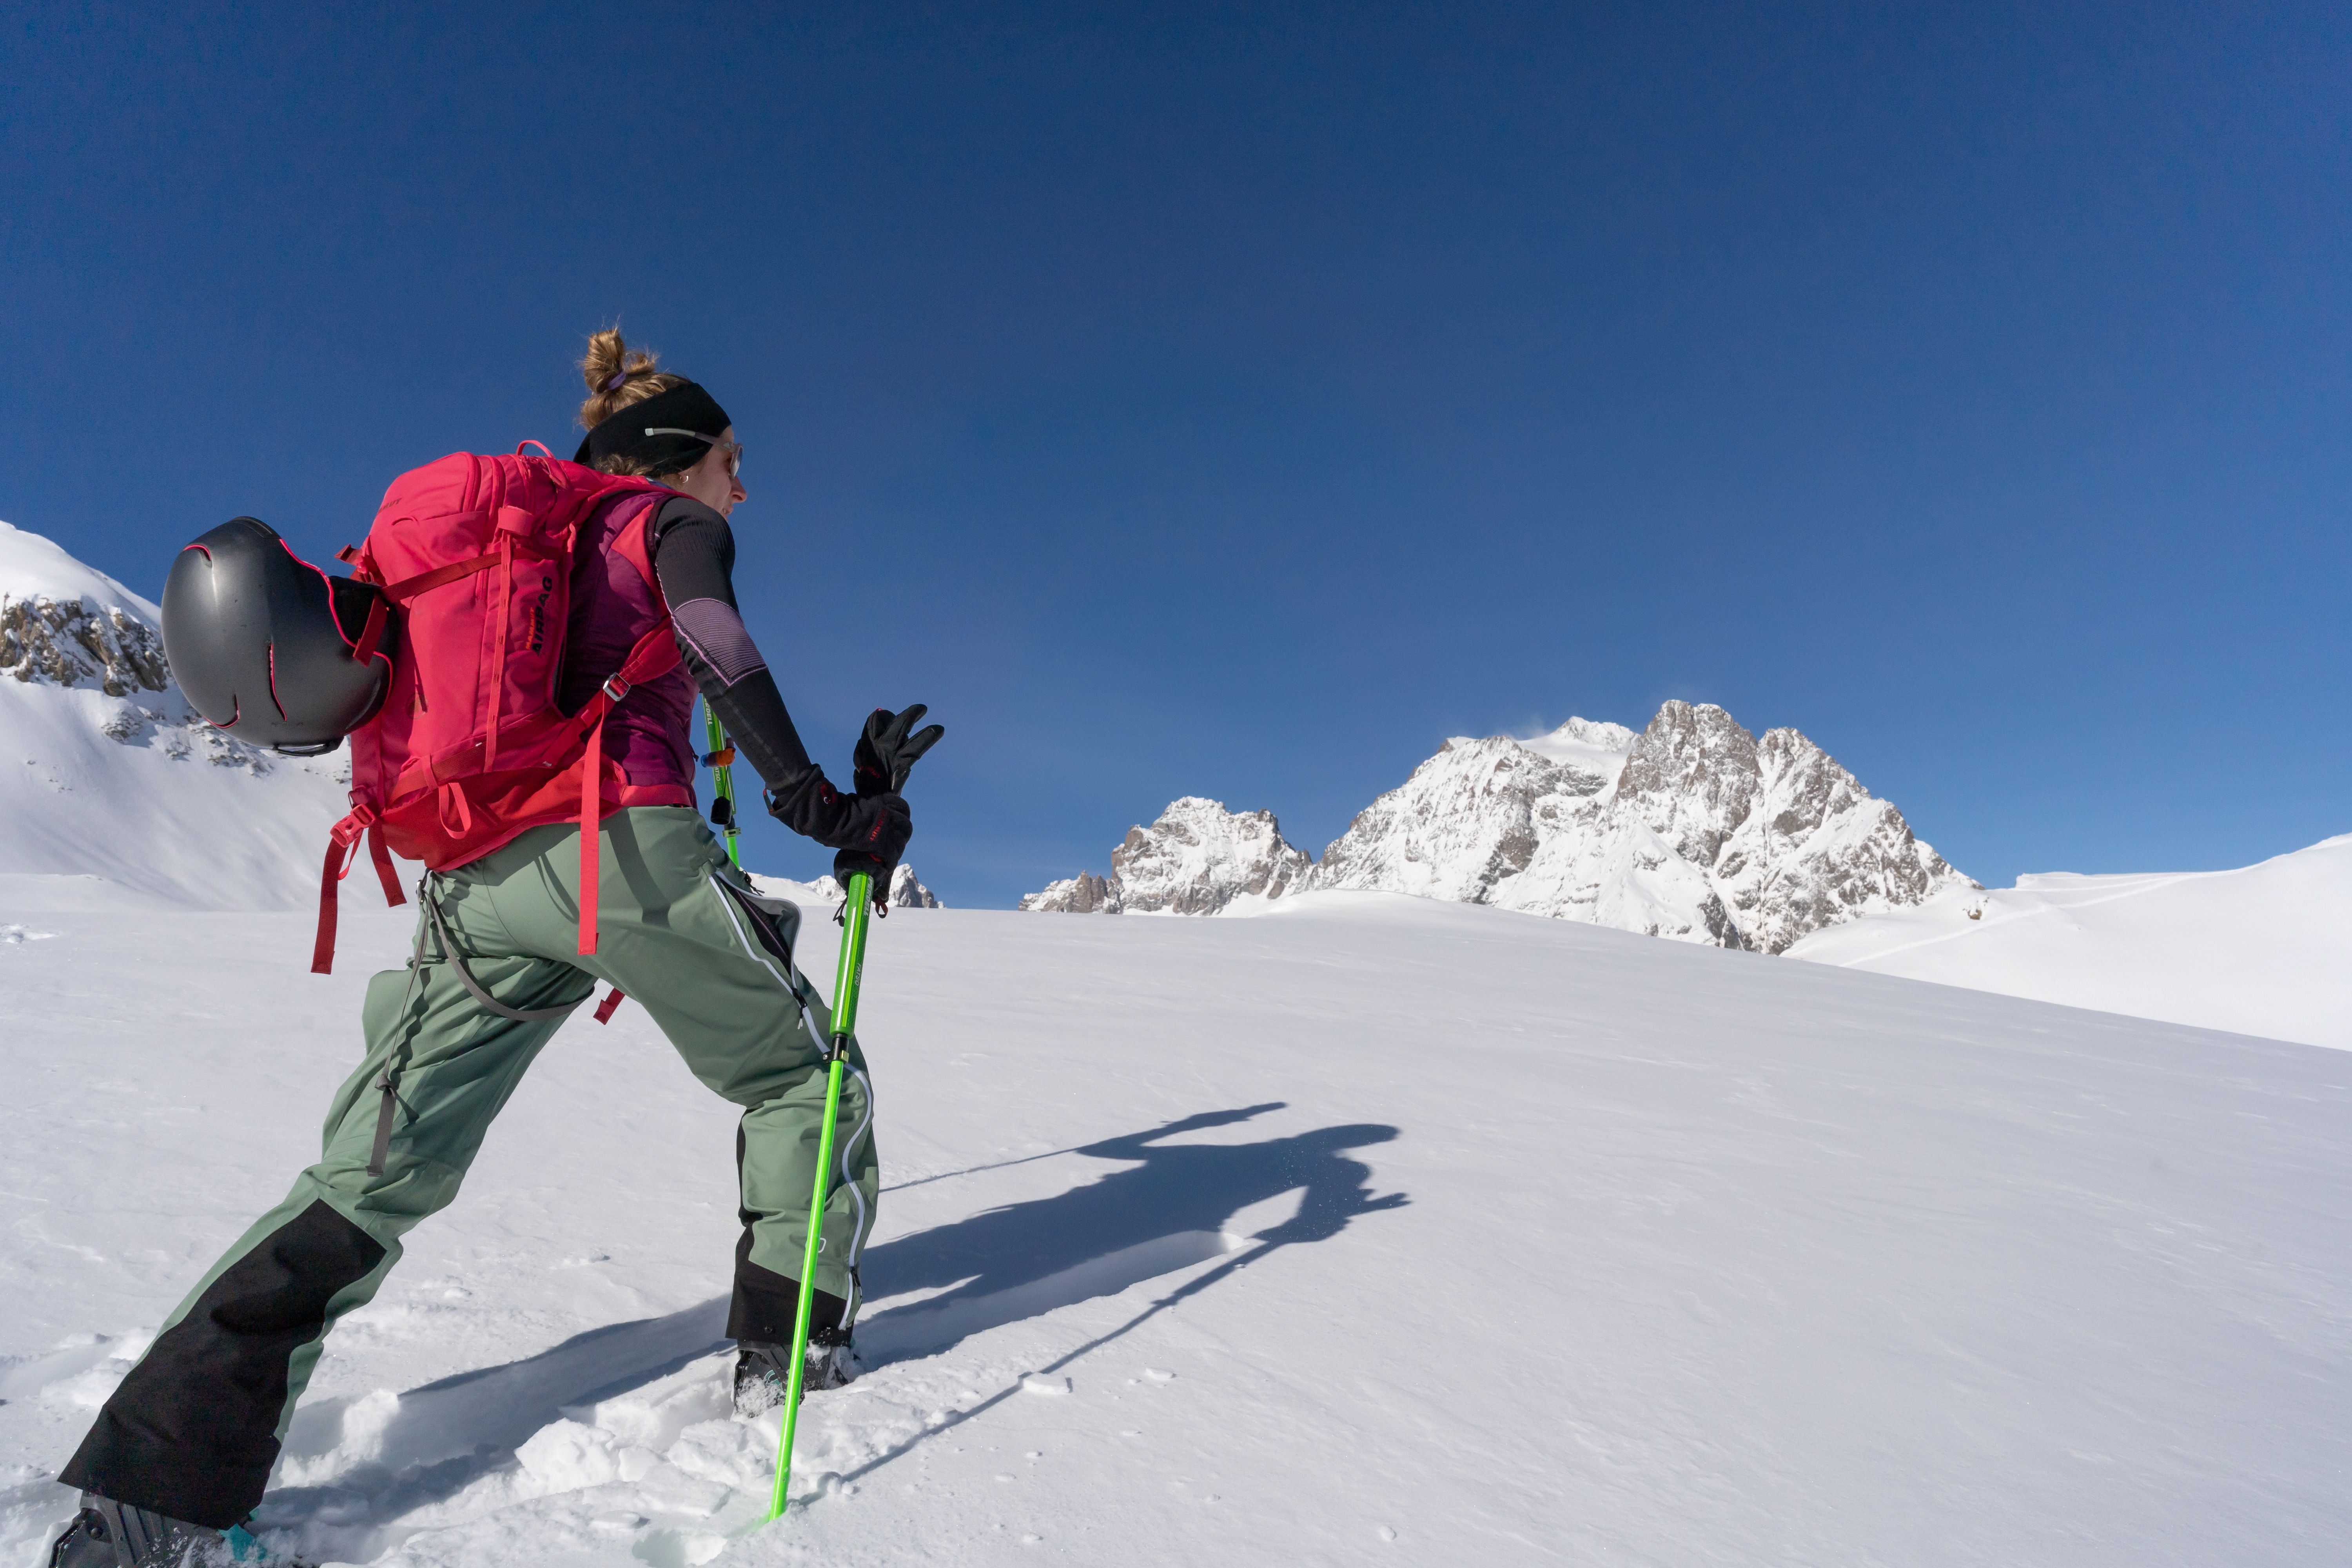 If you're planning to go ski touring, you really need to get in shape